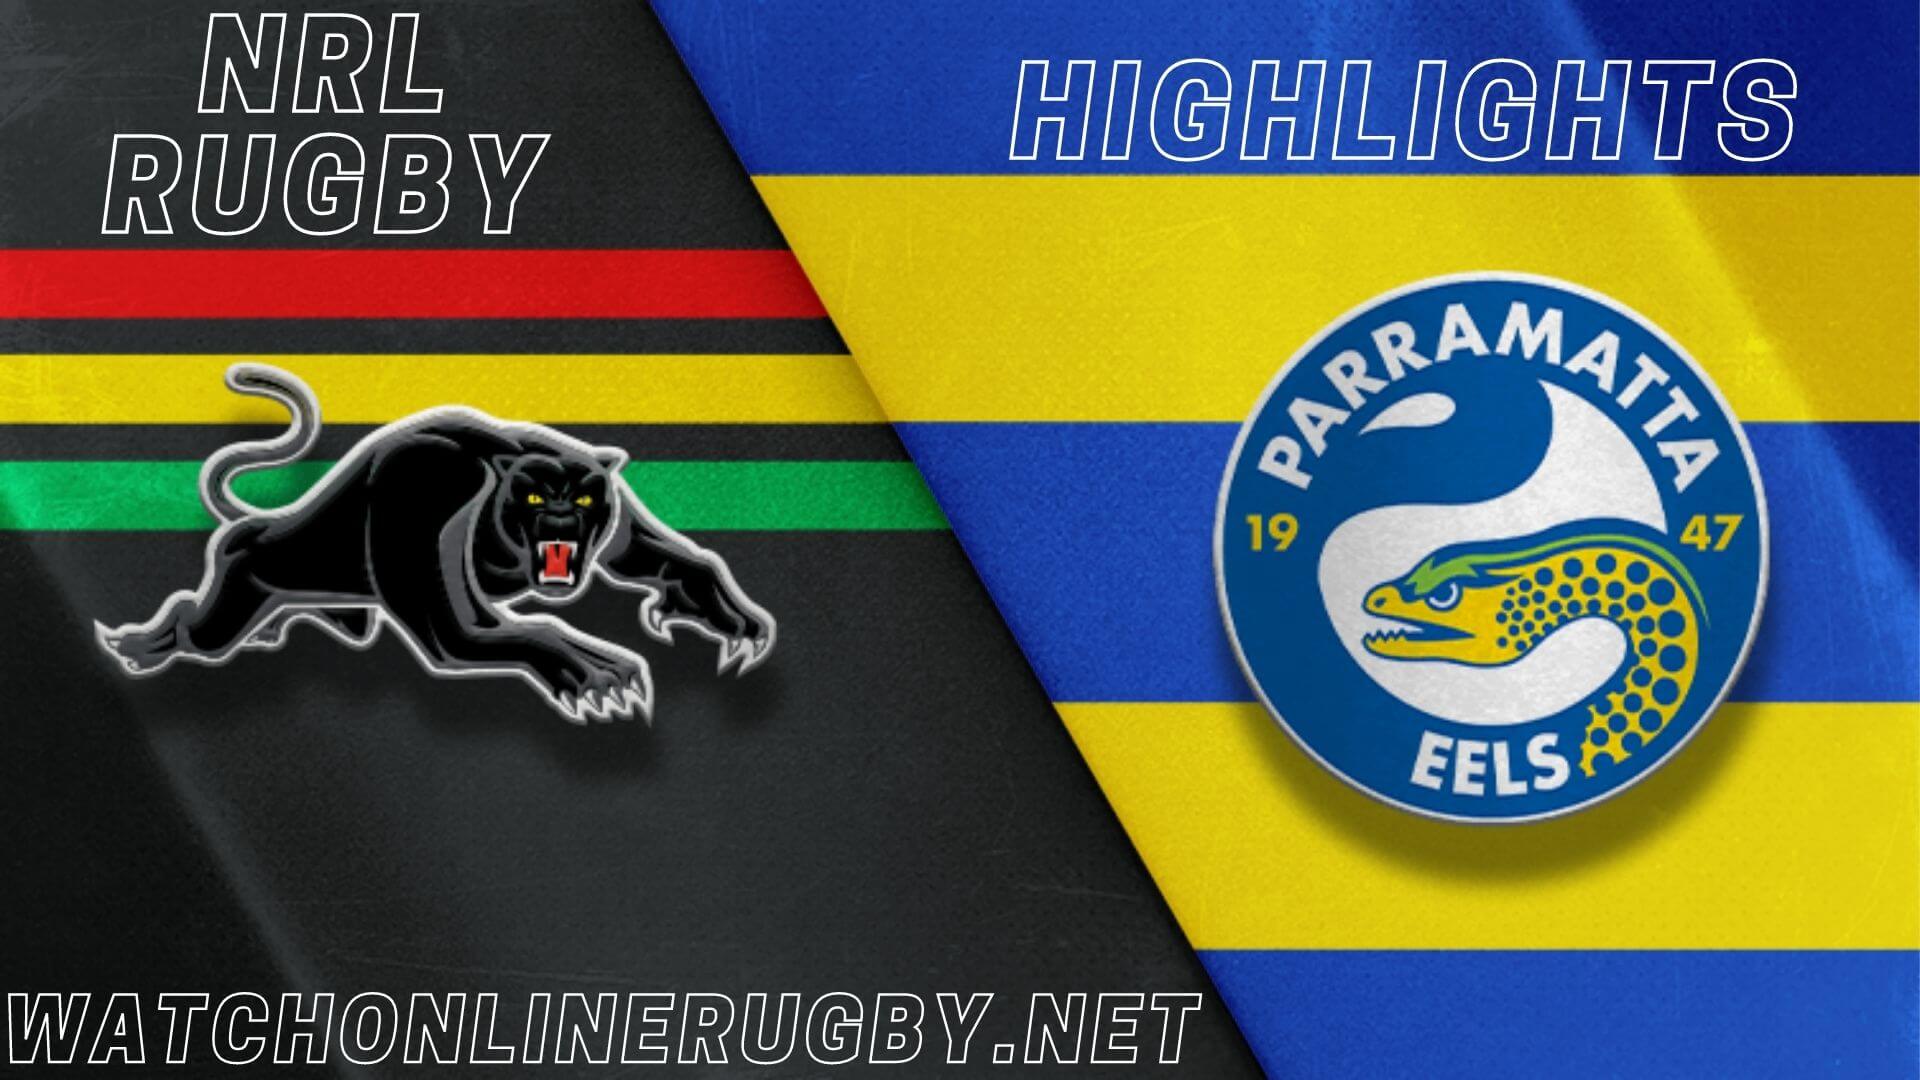 Panthers Vs Eels Highlights RD 9 NRL Rugby